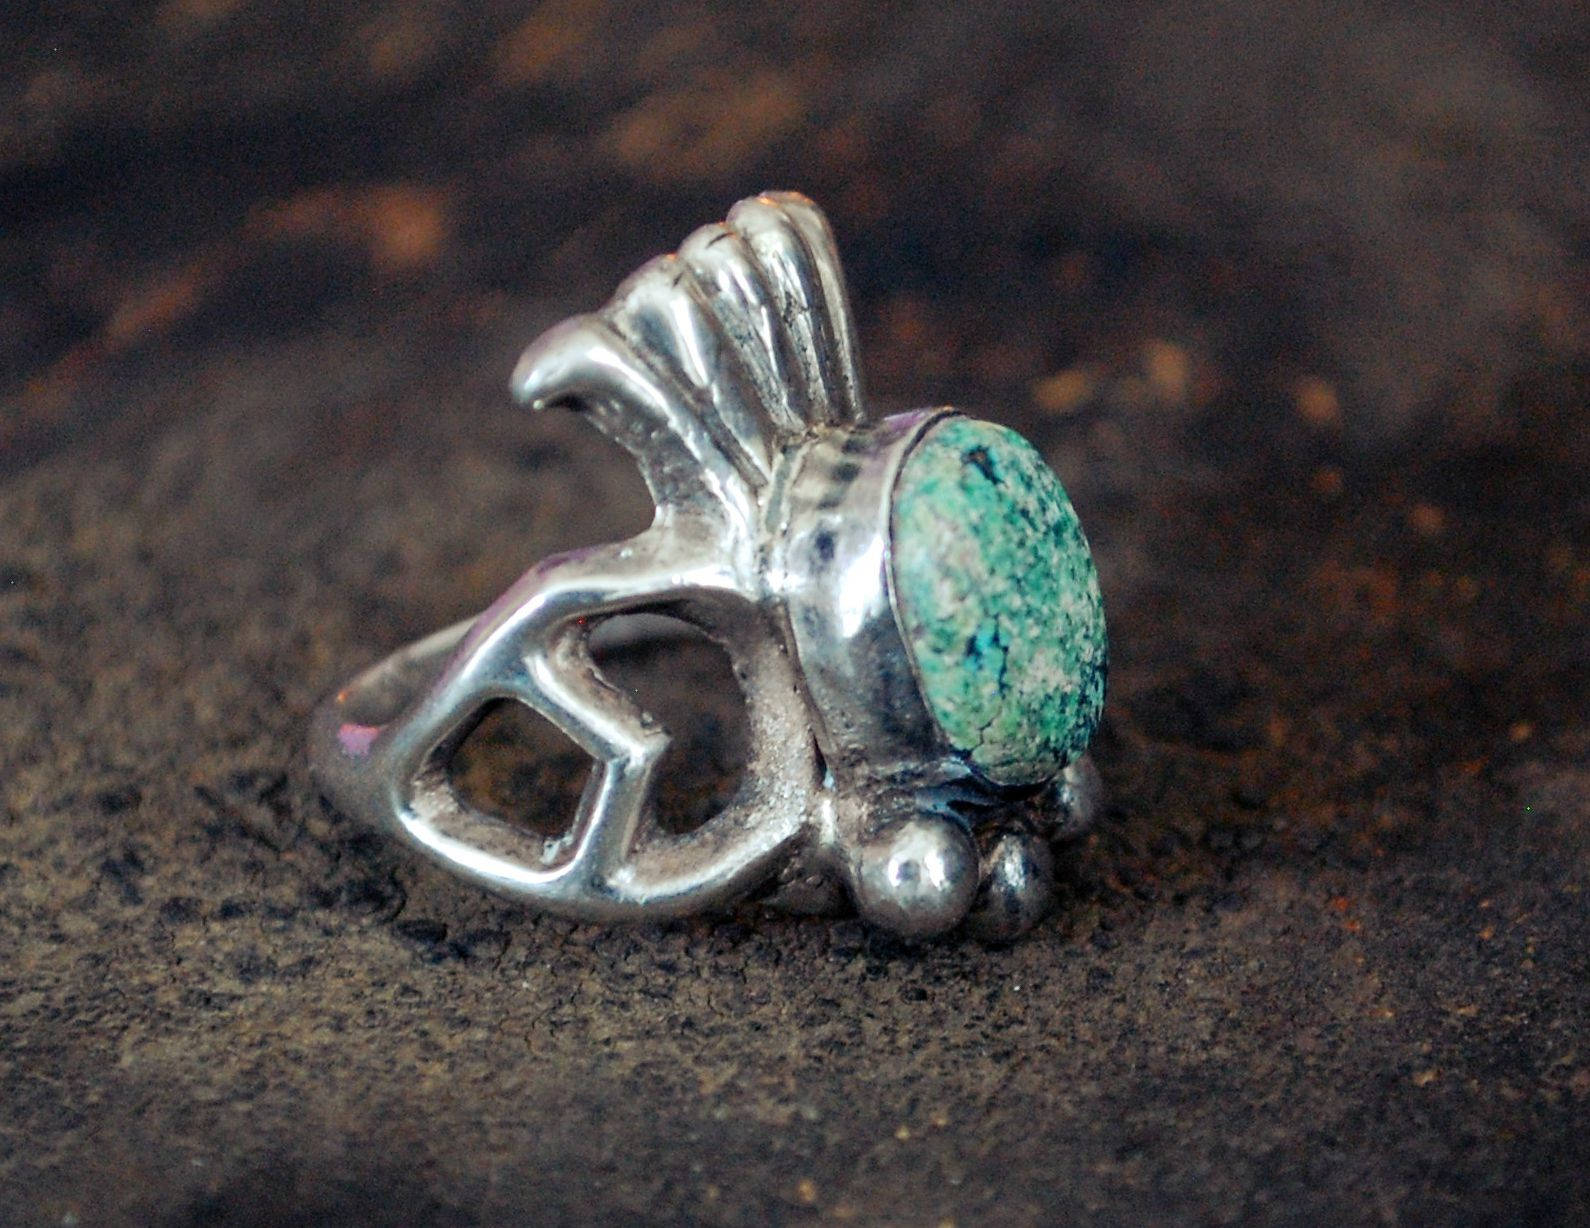 Navajo Native American Sandcast Ring with Turquoise - Size 6.5